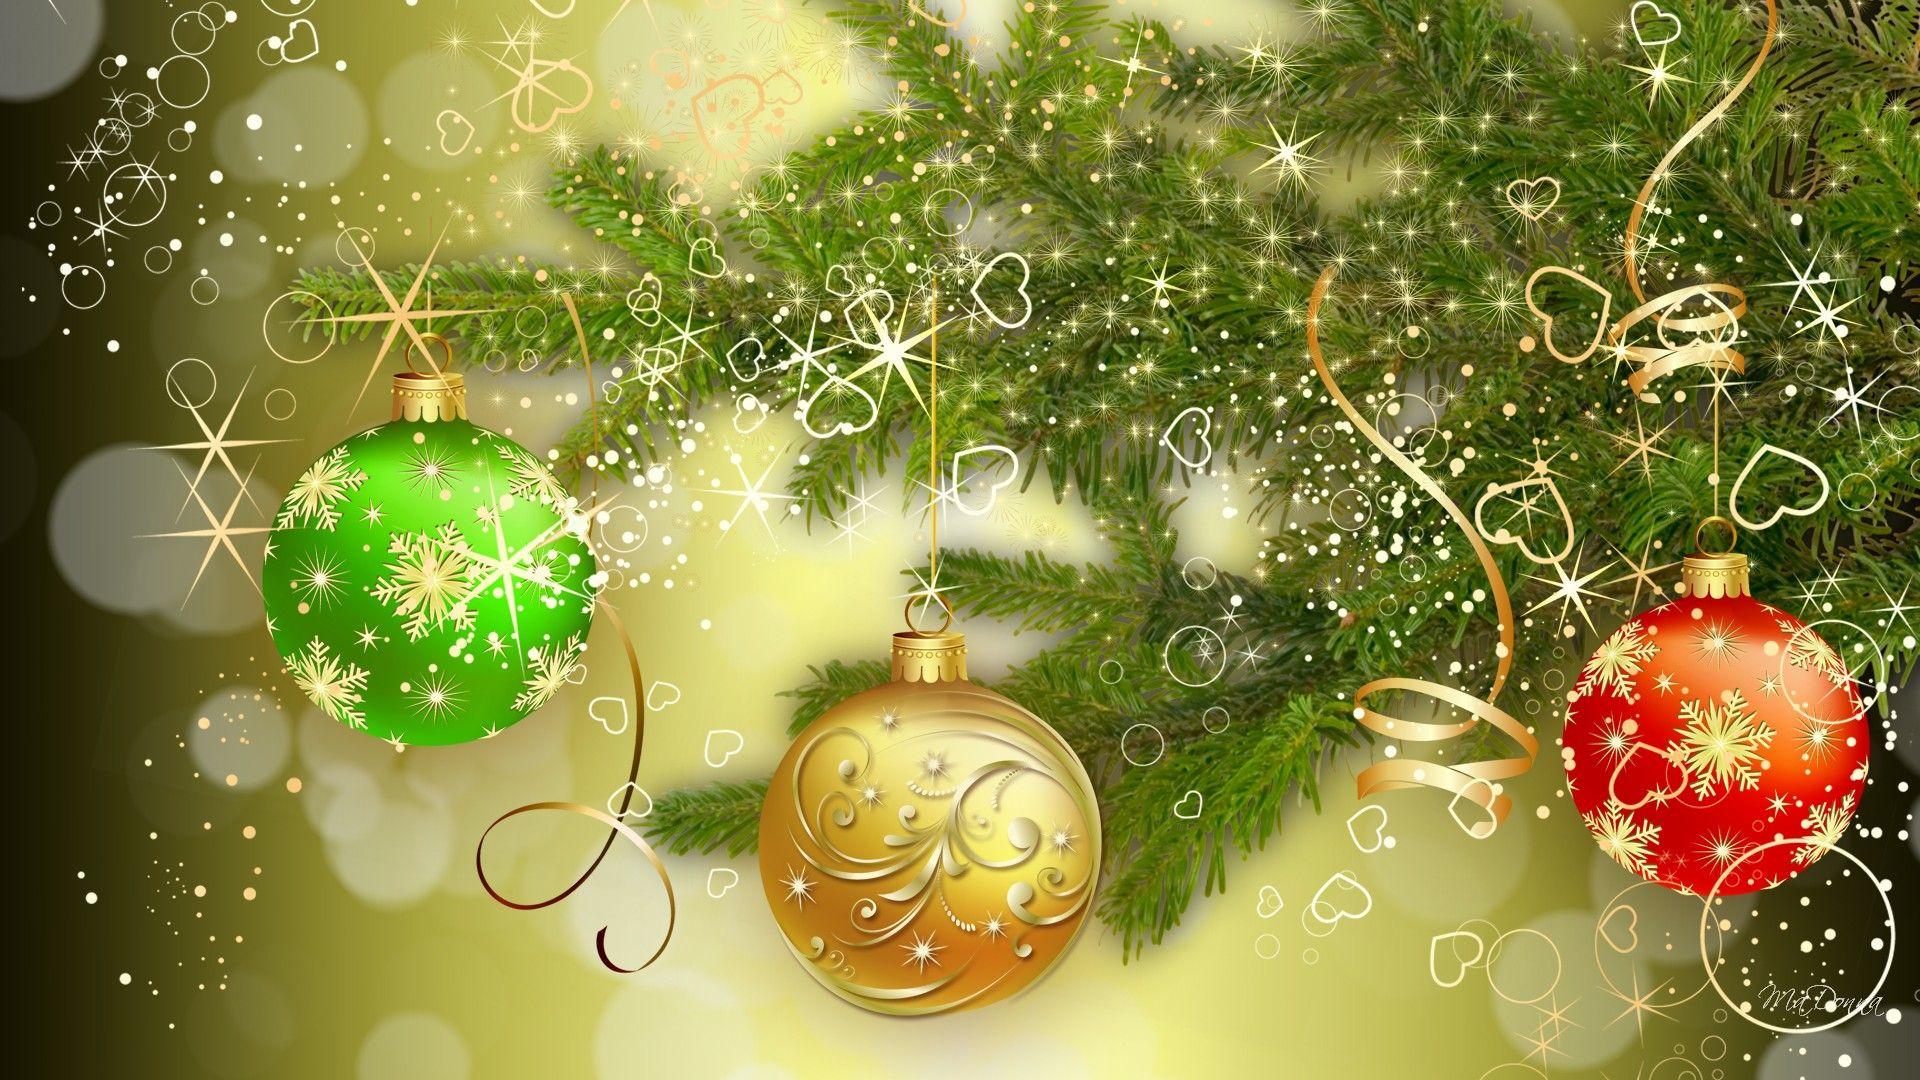 Christmas HD Wallpaper. Background Imagex1080